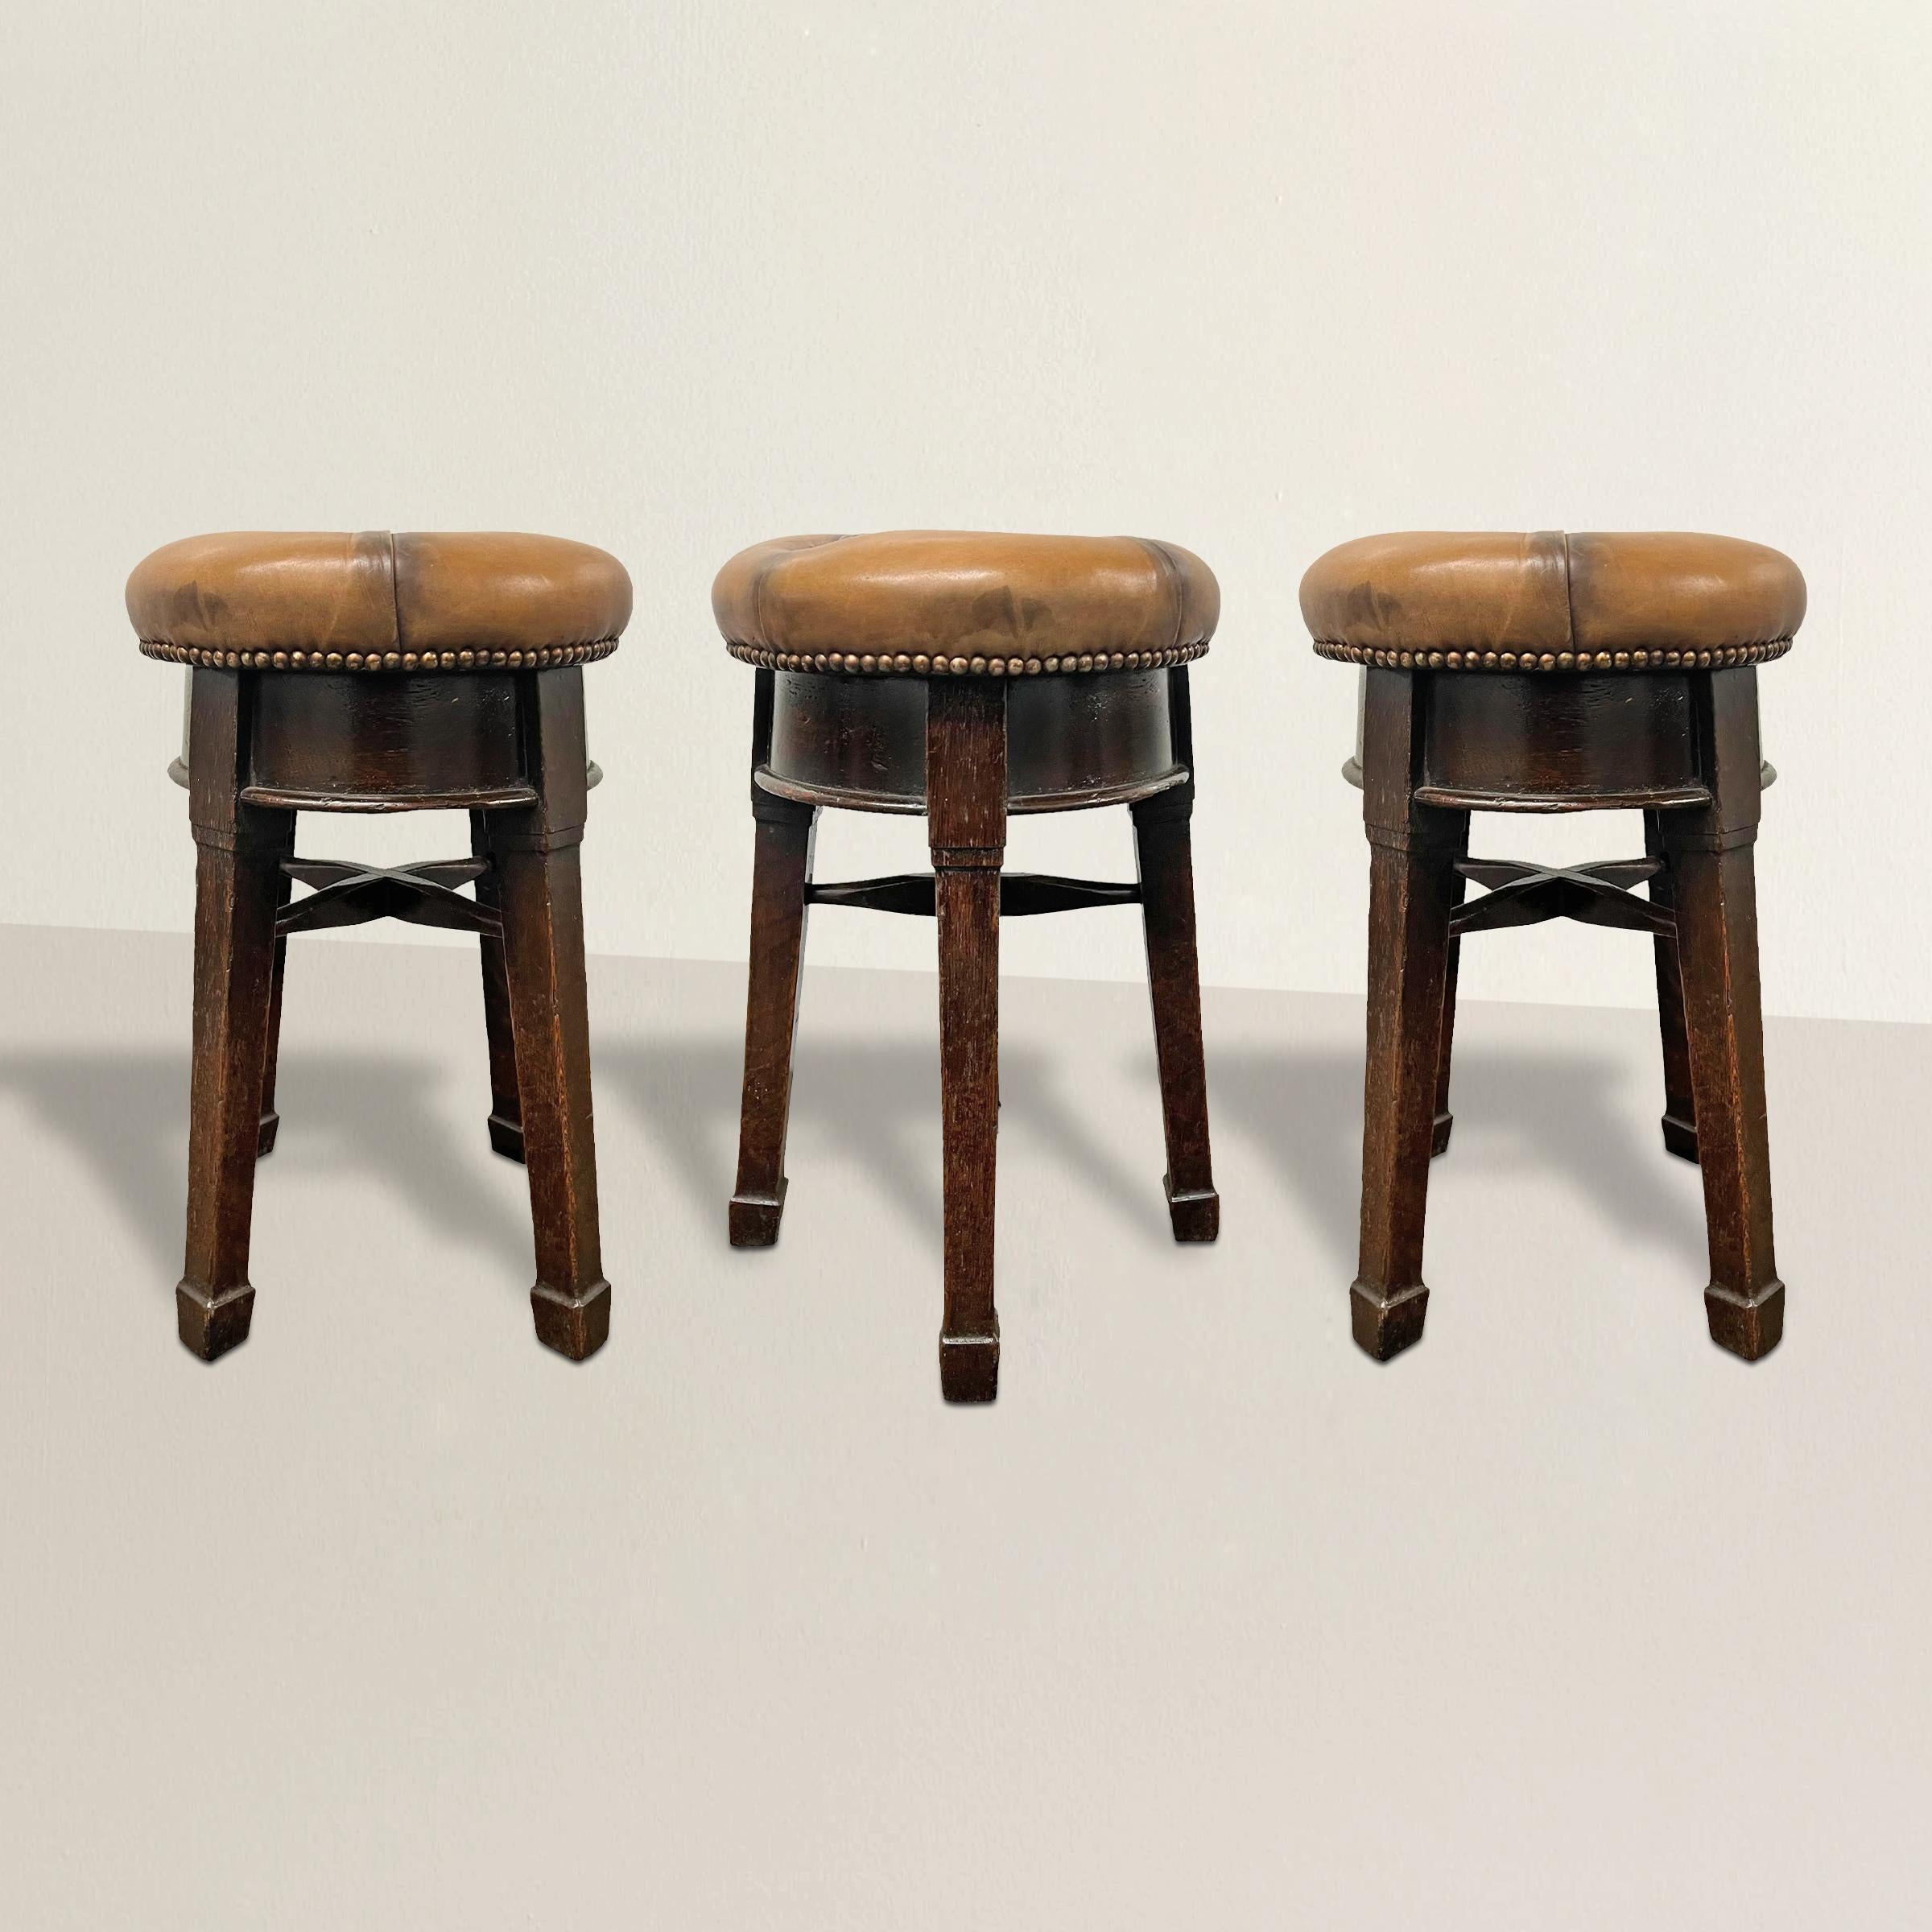 These three 19th-century English Arts & Crafts pub stools with nailhead trim are a stunning blend of functionality and craftsmanship. Influenced by the Arts & Crafts movement, each stool features a distinct design characterized by clean lines,